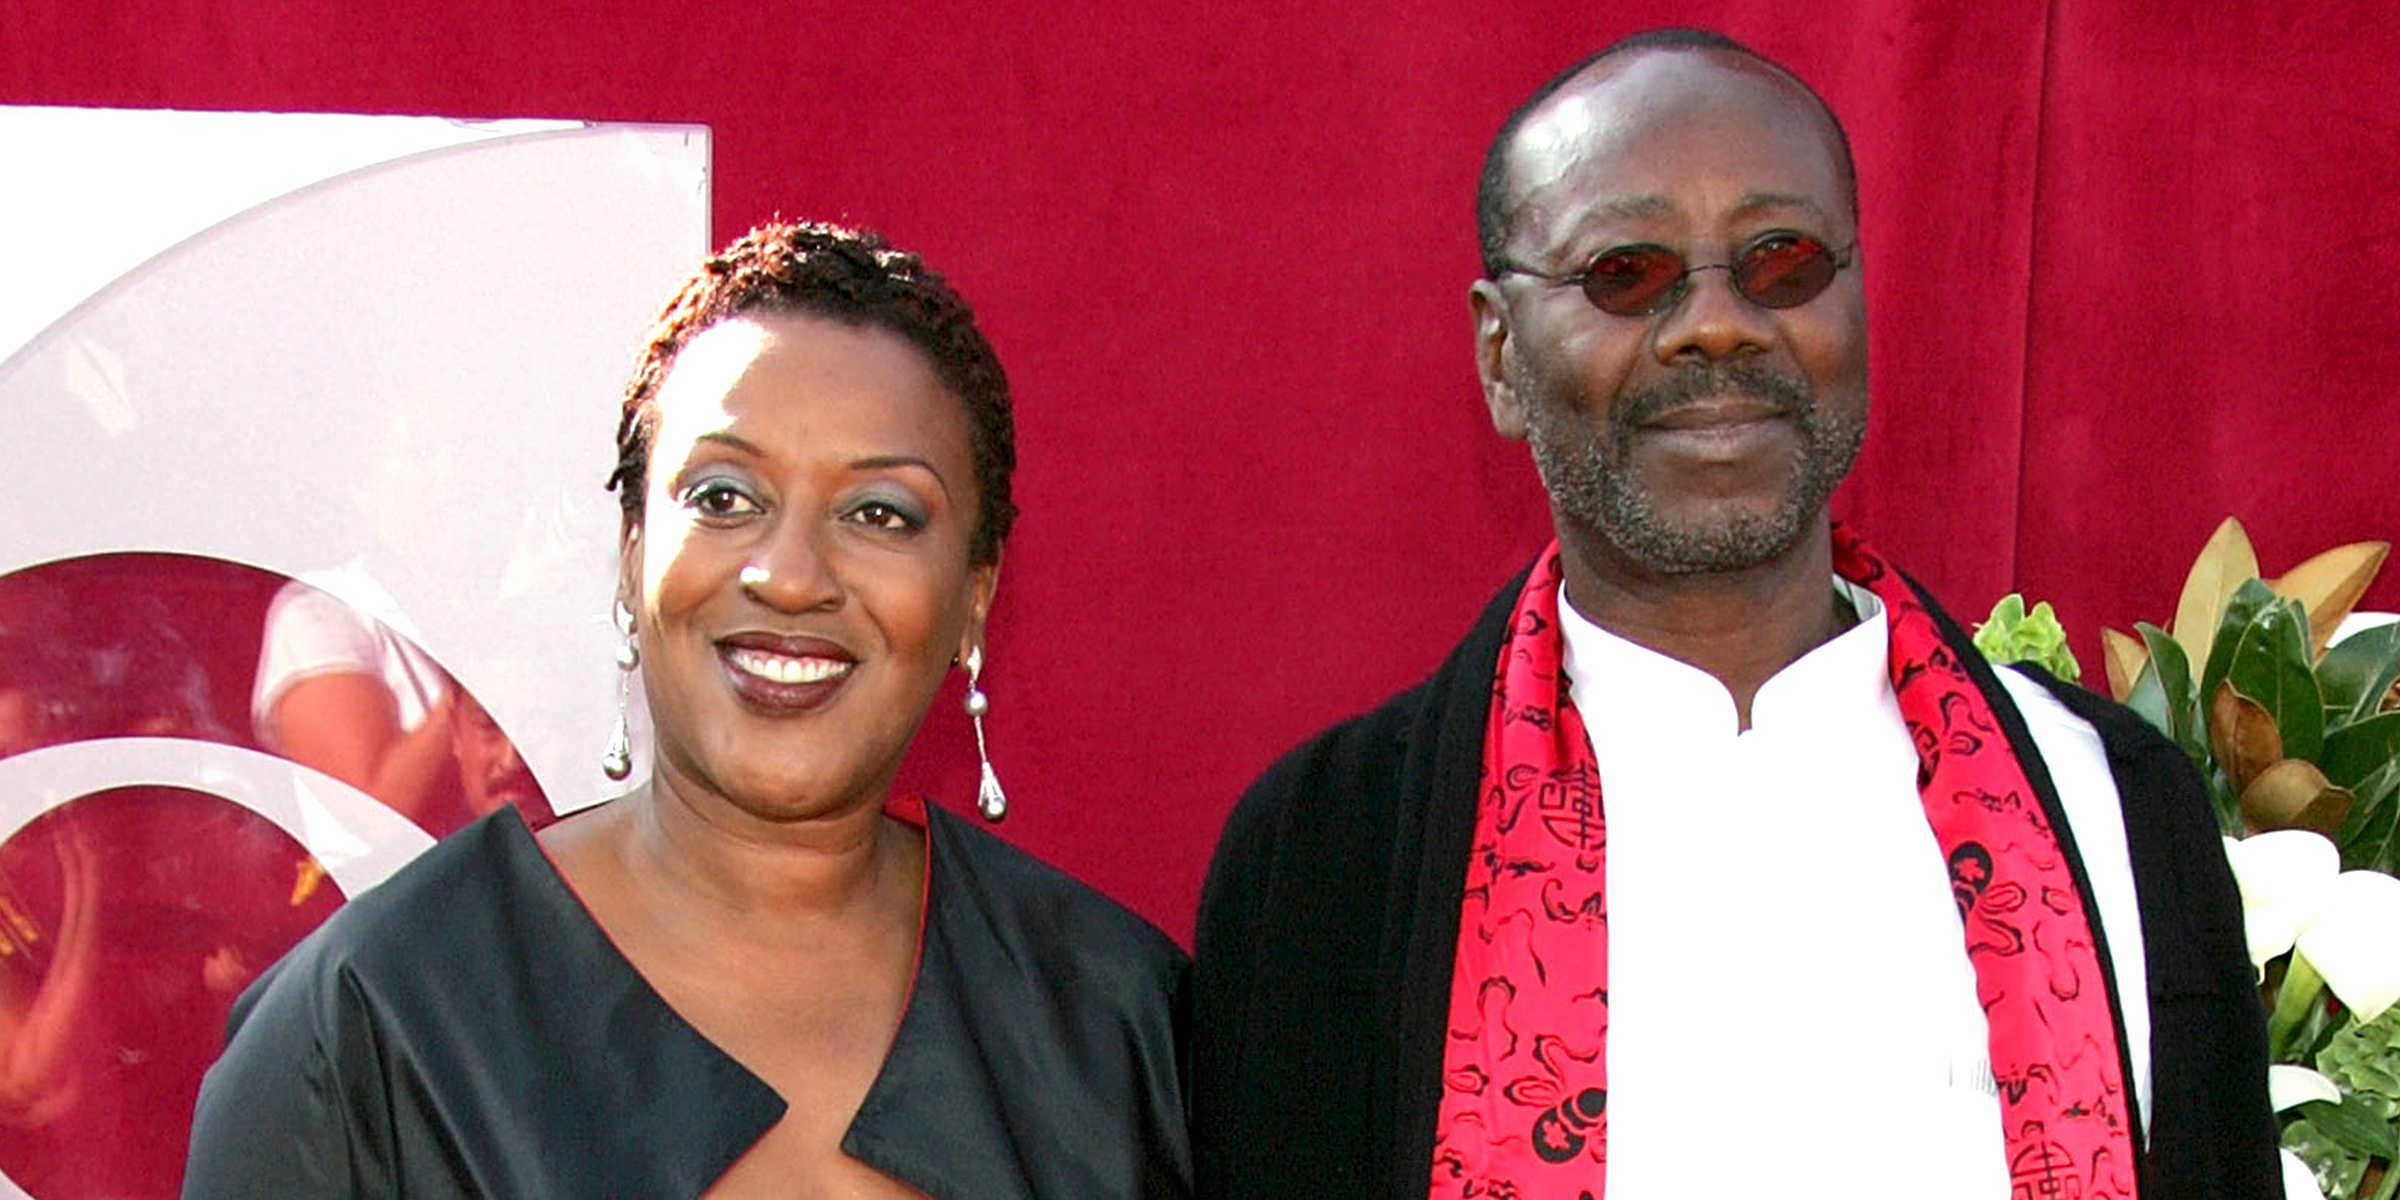 CCH Pounder and Boubacar Kone | Source: Getty Images